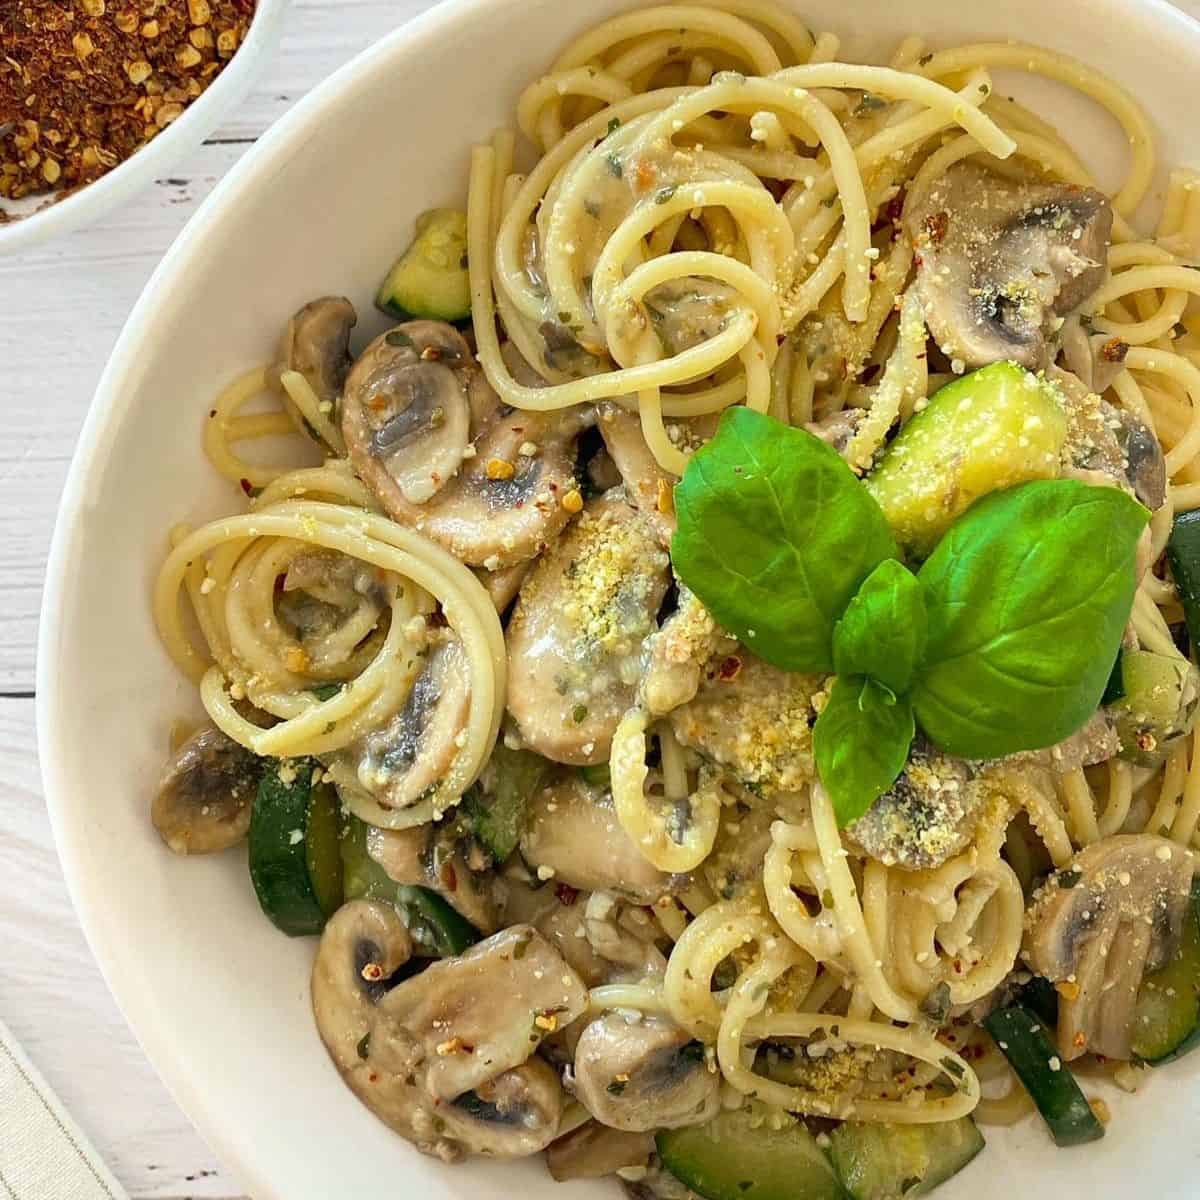 Plate of spaghetti, zucchini and mushrooms with basil on top.